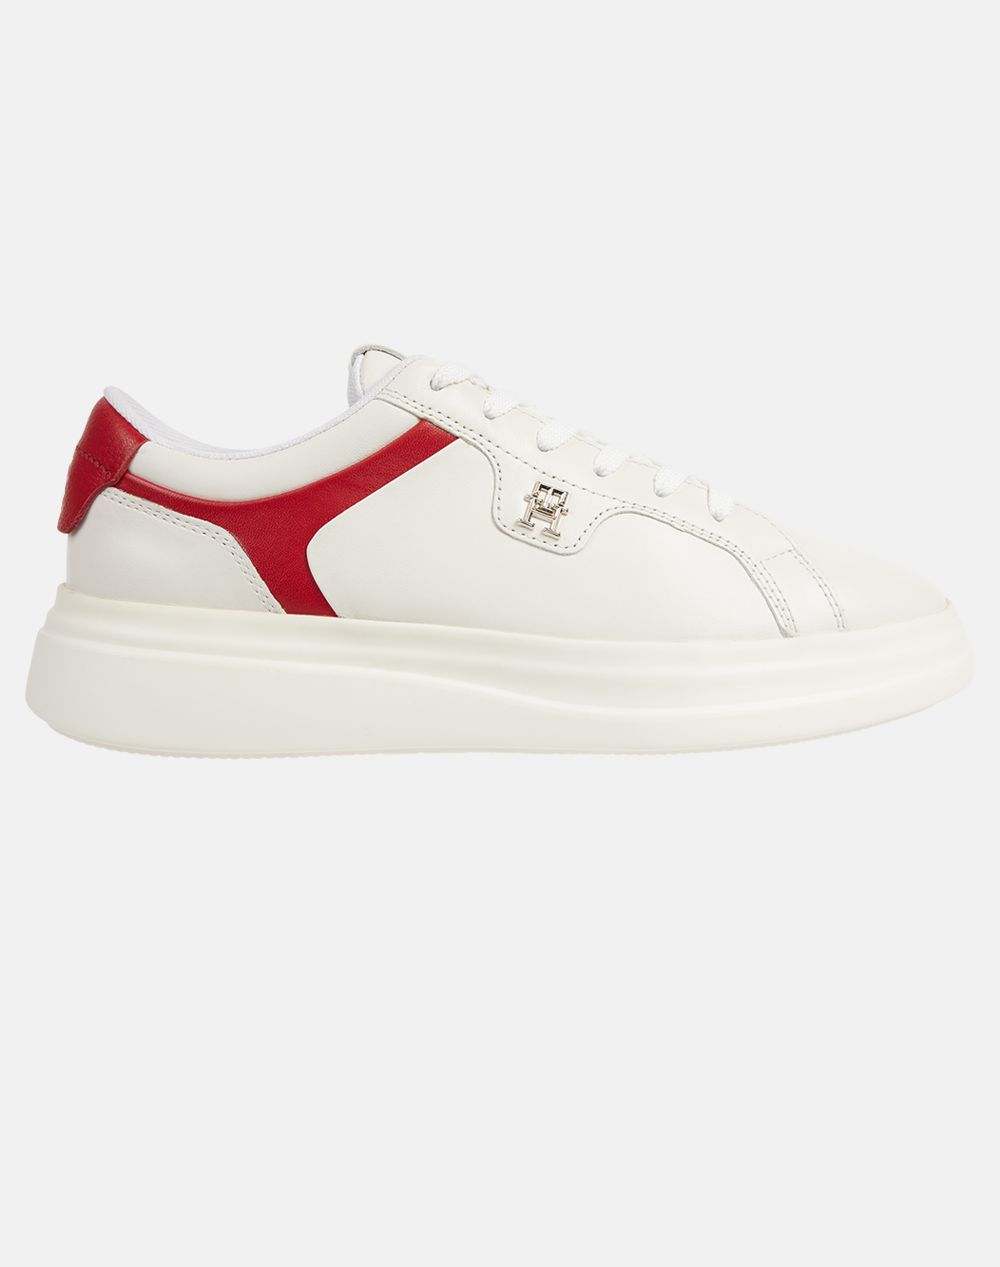 TOMMY HILFIGER POINTY COURT SNEAKER FW0FW07460-0K5 Red